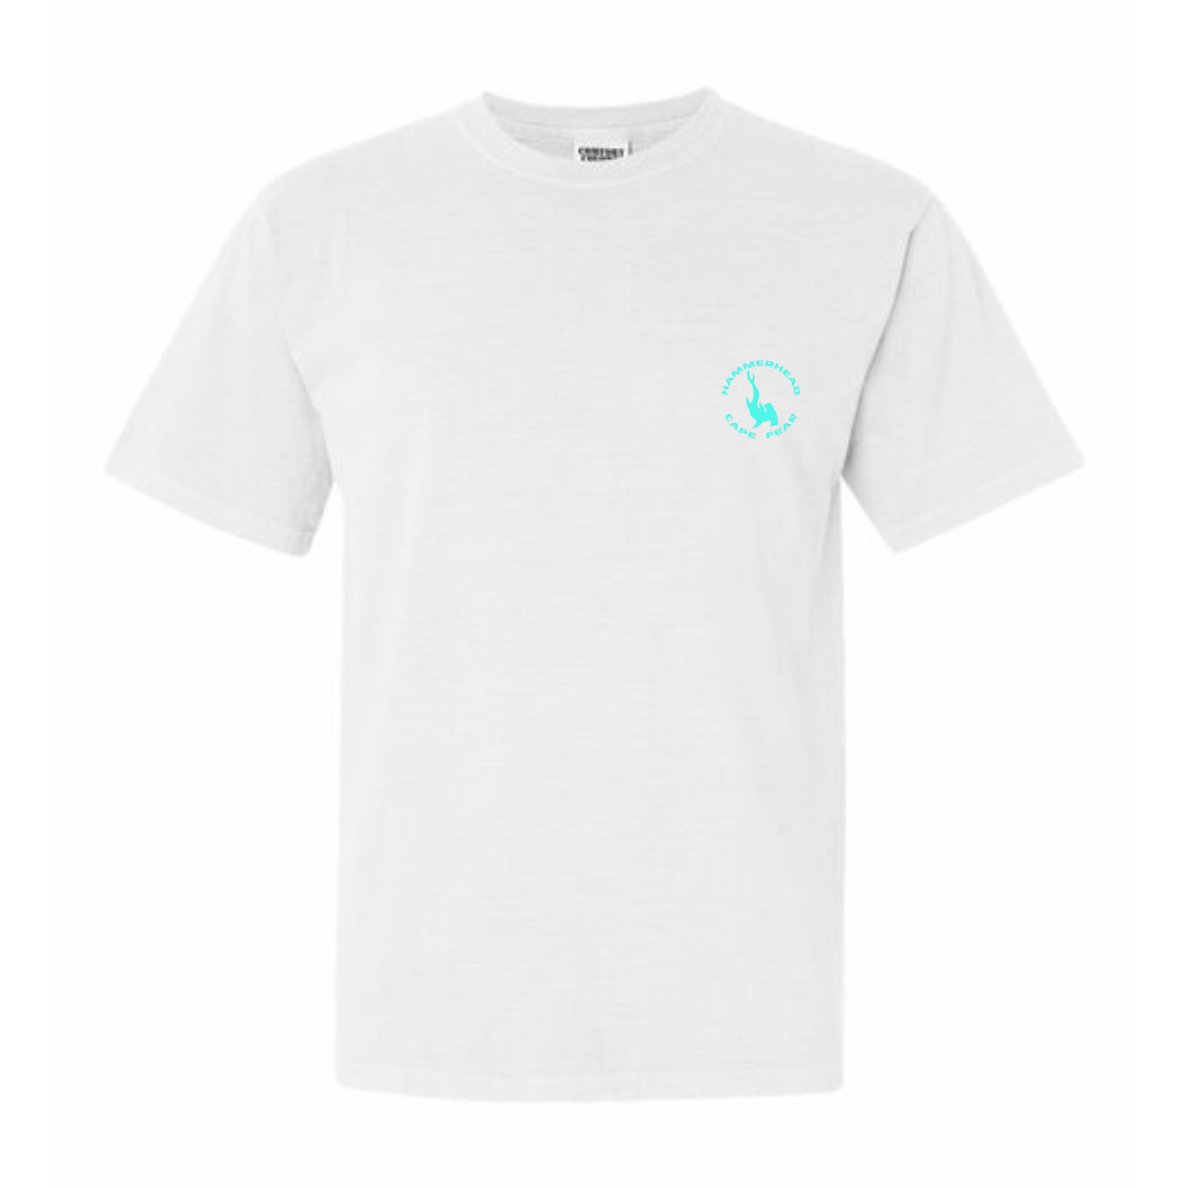 Reef T-Shirt White, Relaxed Fit